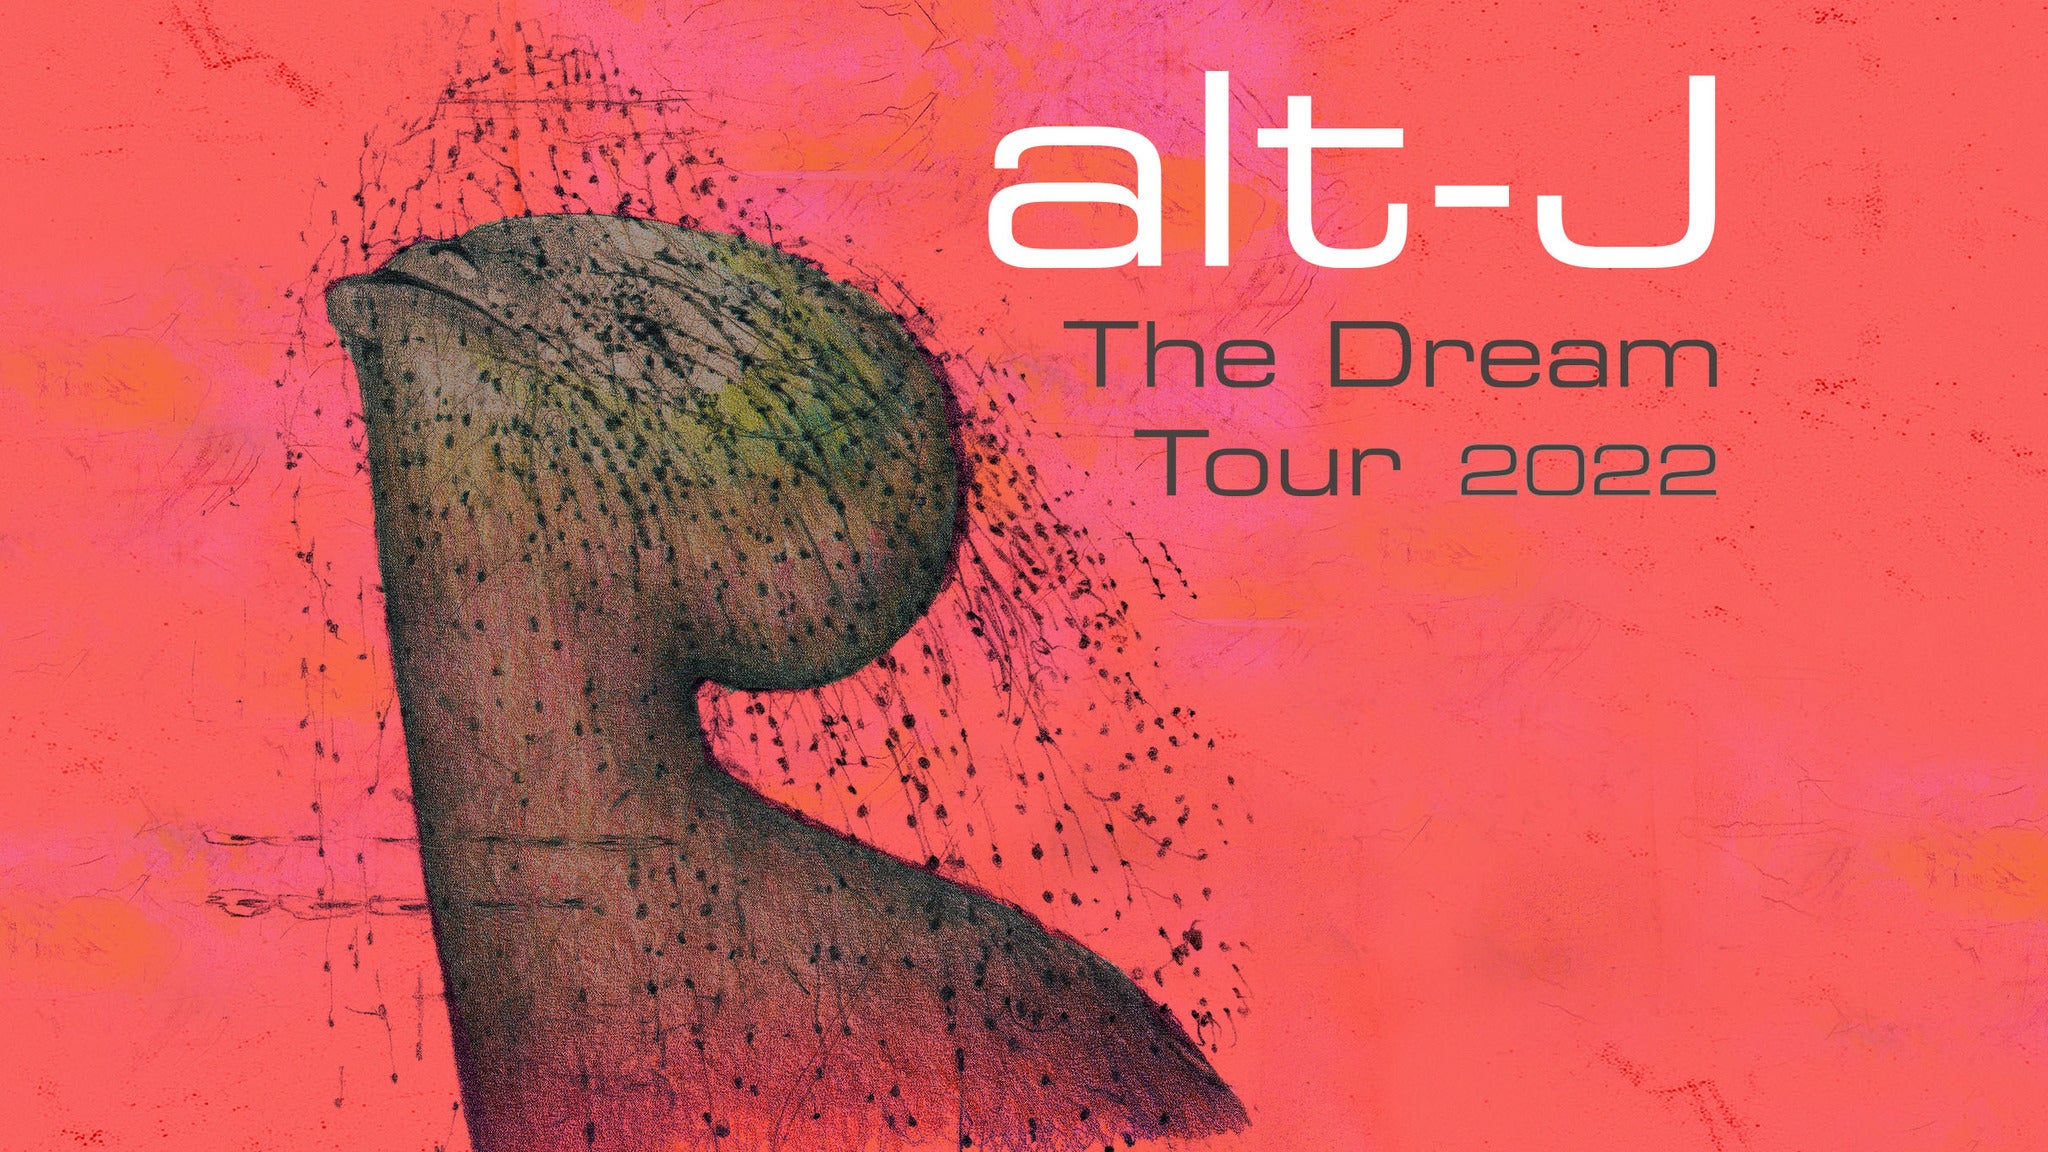 Image used with permission from Ticketmaster | alt-J - The Dream Tour 2022 tickets